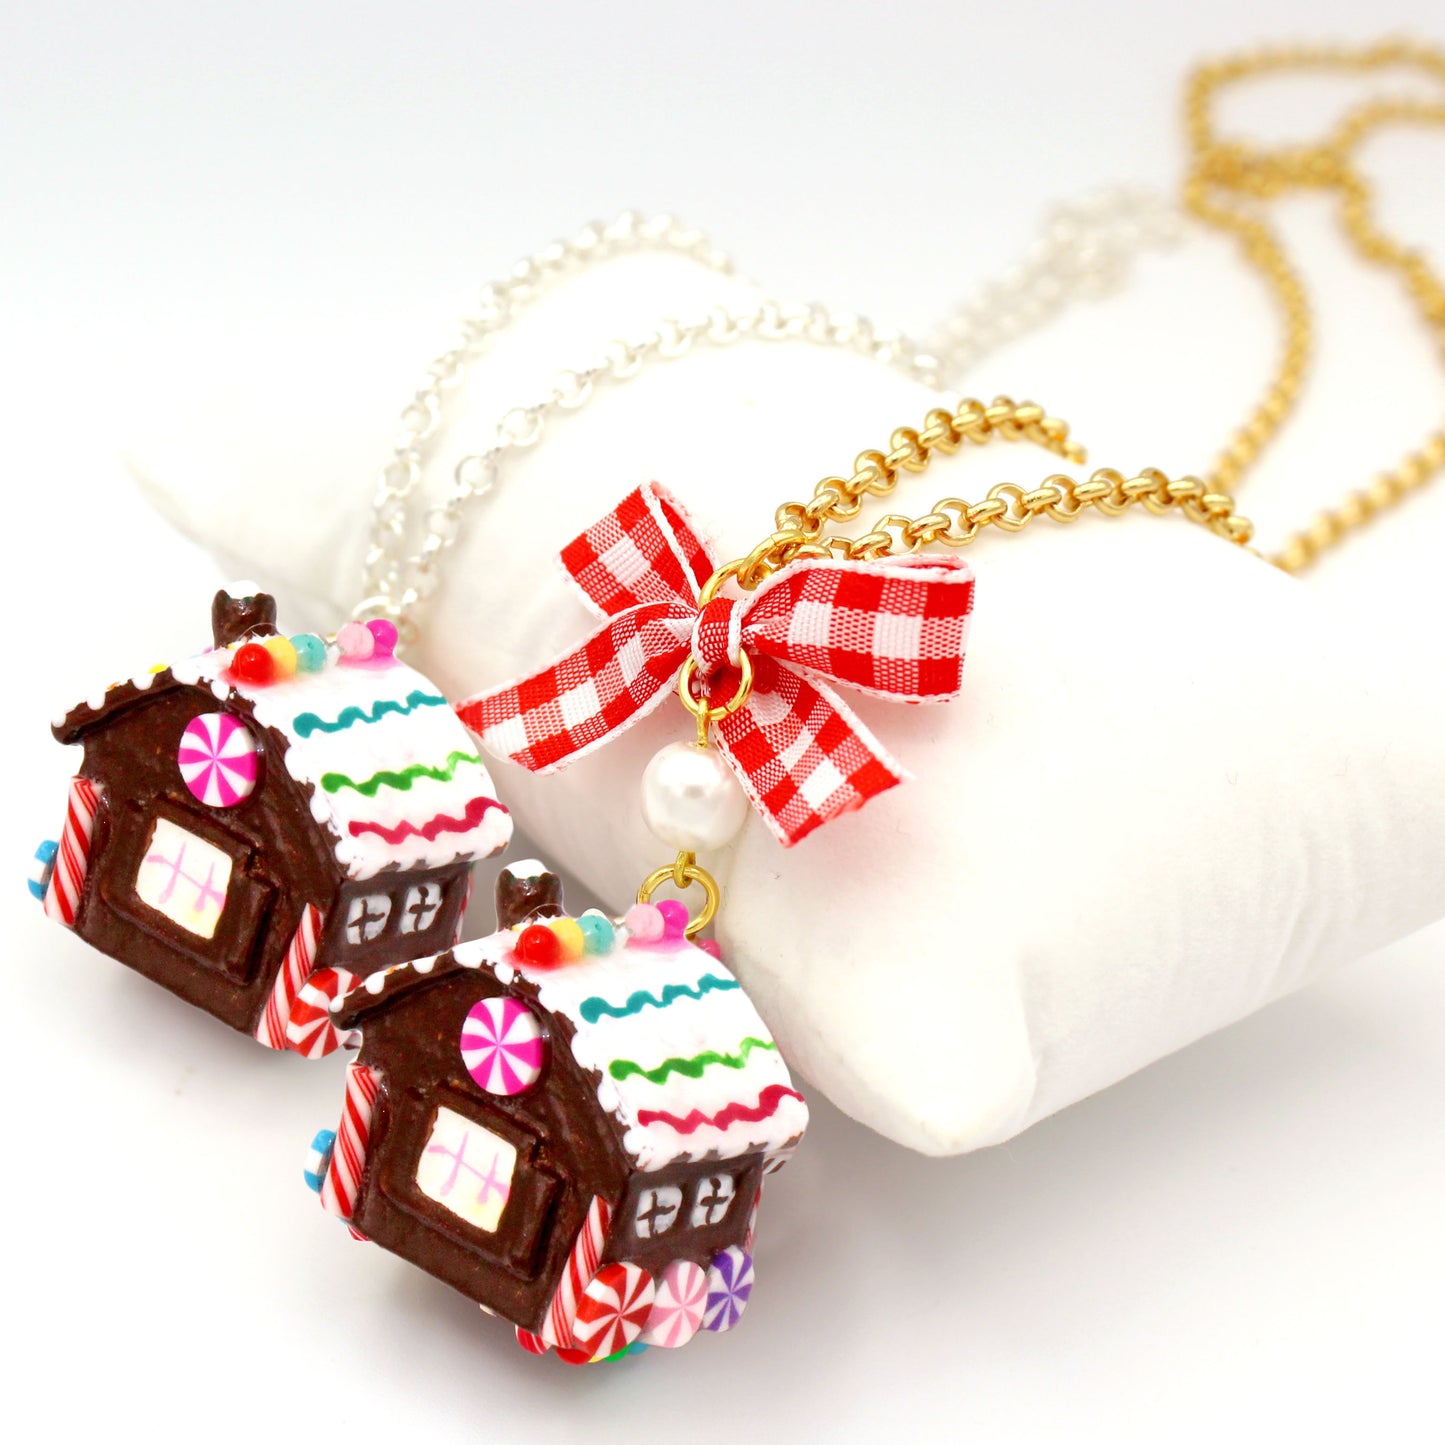 Miniature Gingerbread House Necklace - Limited Edition Holiday Collection